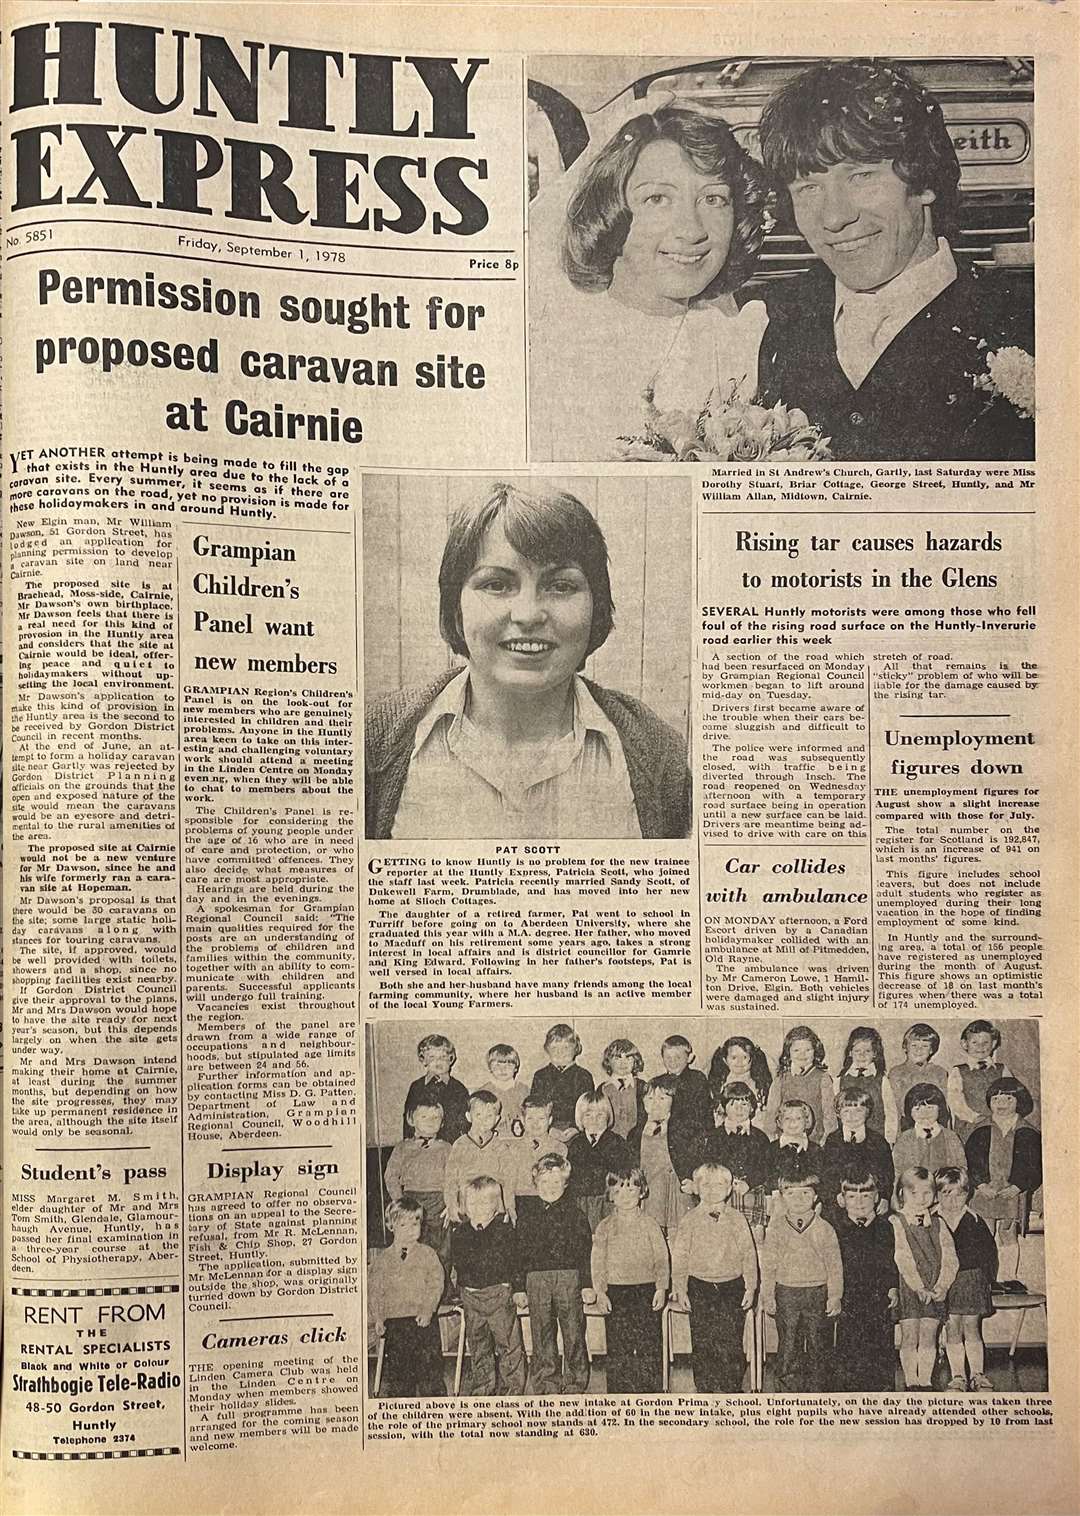 Pat Scott's introduction on the front page of the Huntly Express in September 1978.